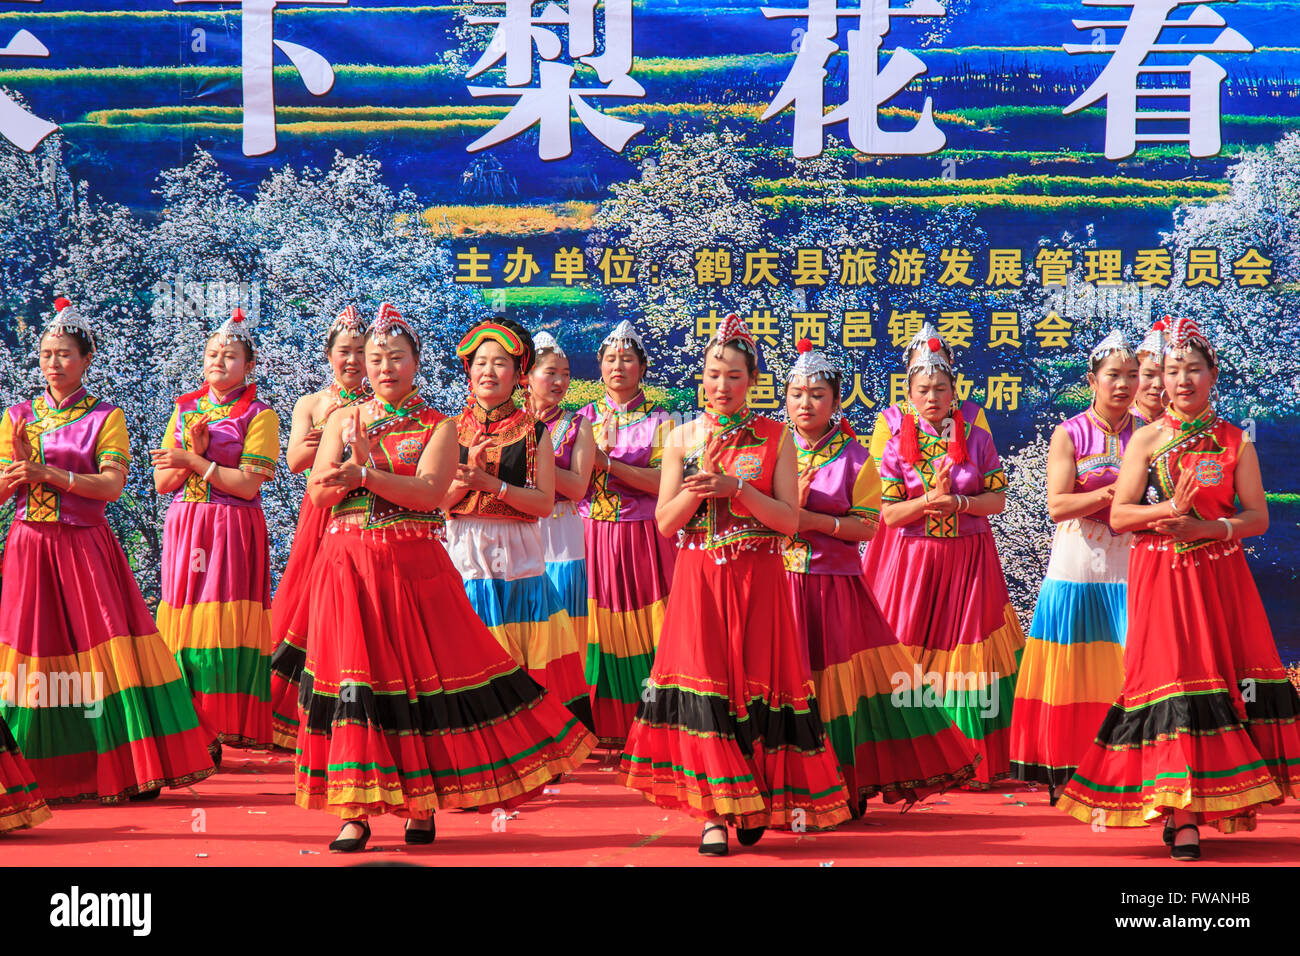 Heqing, China - March 15, 2016: Chinese women dressed with traditional clothing dancing and singing during the Heqing Qifeng Pea Stock Photo